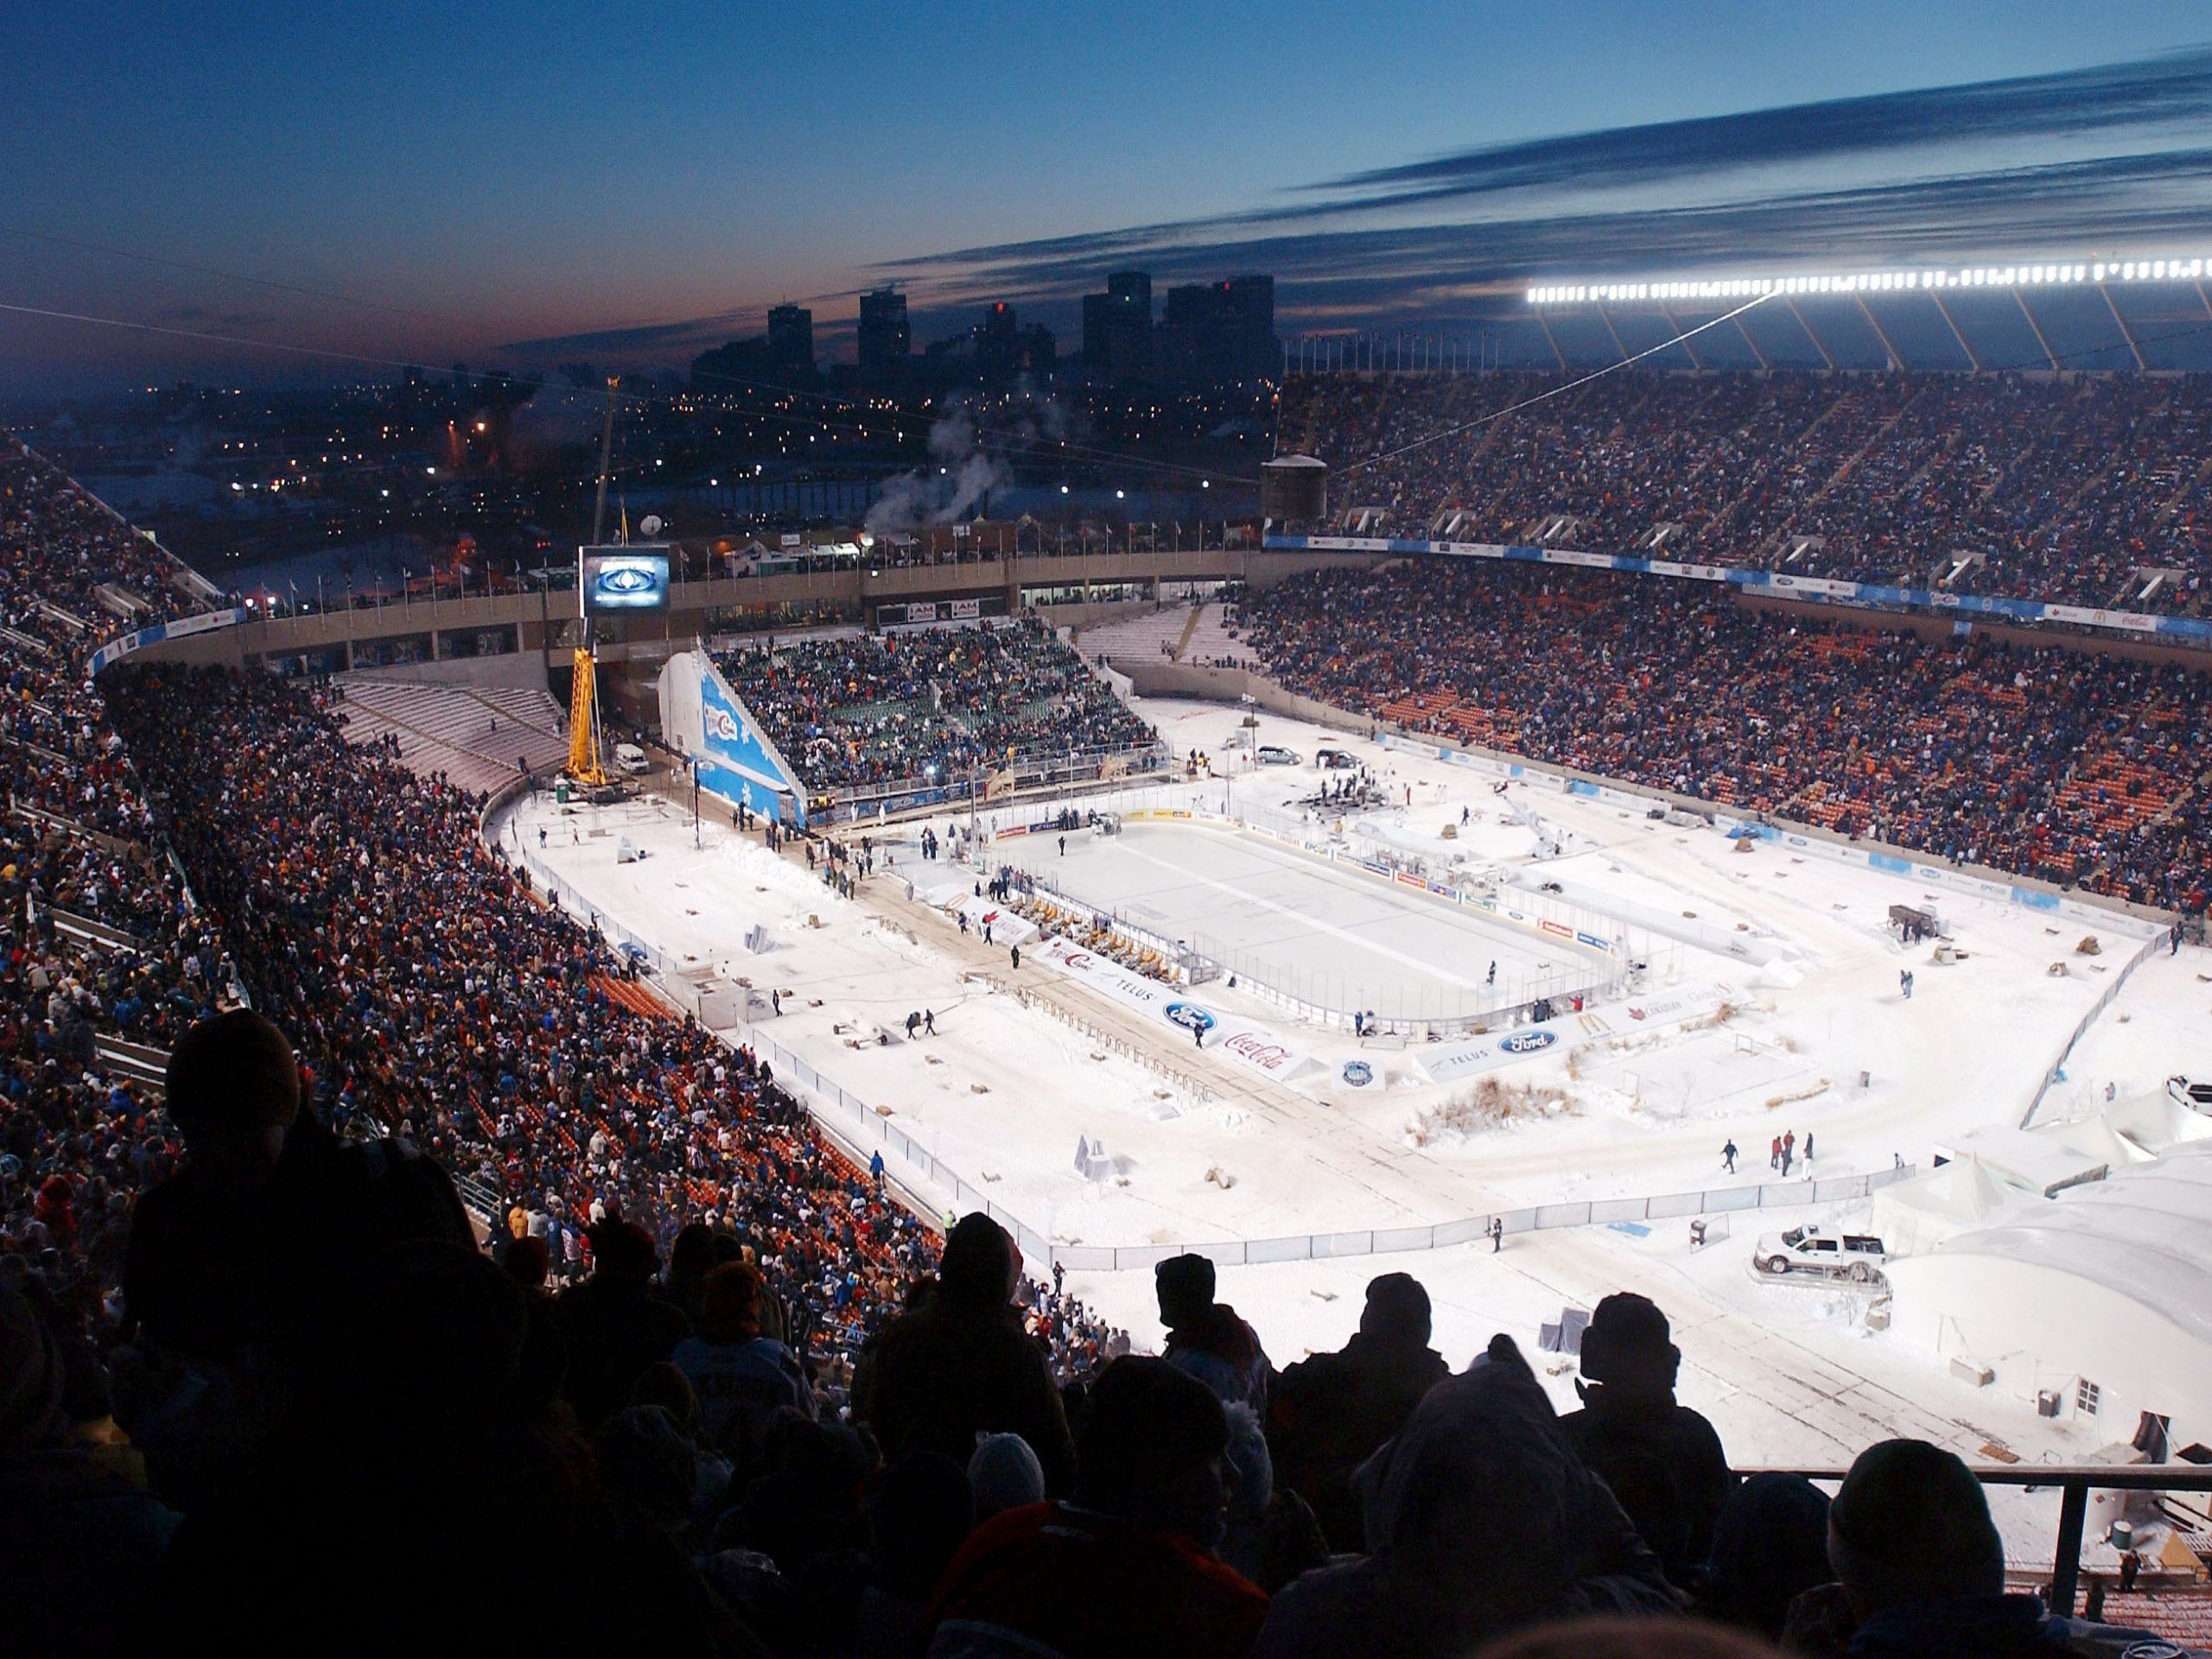 NHL Heritage Classic: Most memorable moments in Canadian outdoor